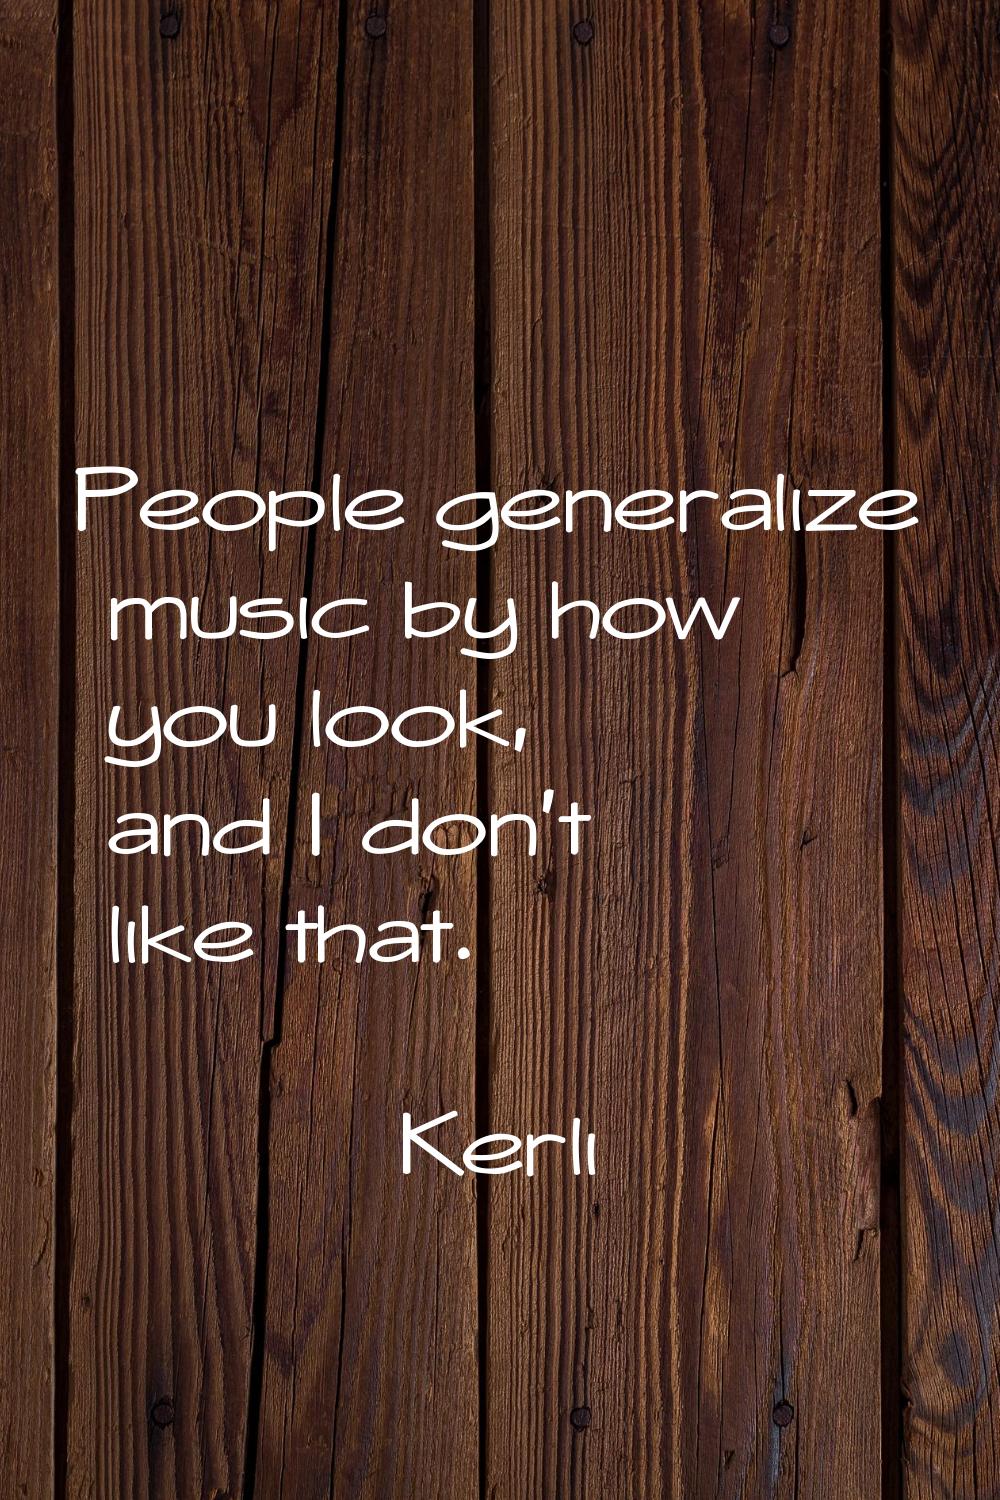 People generalize music by how you look, and I don't like that.